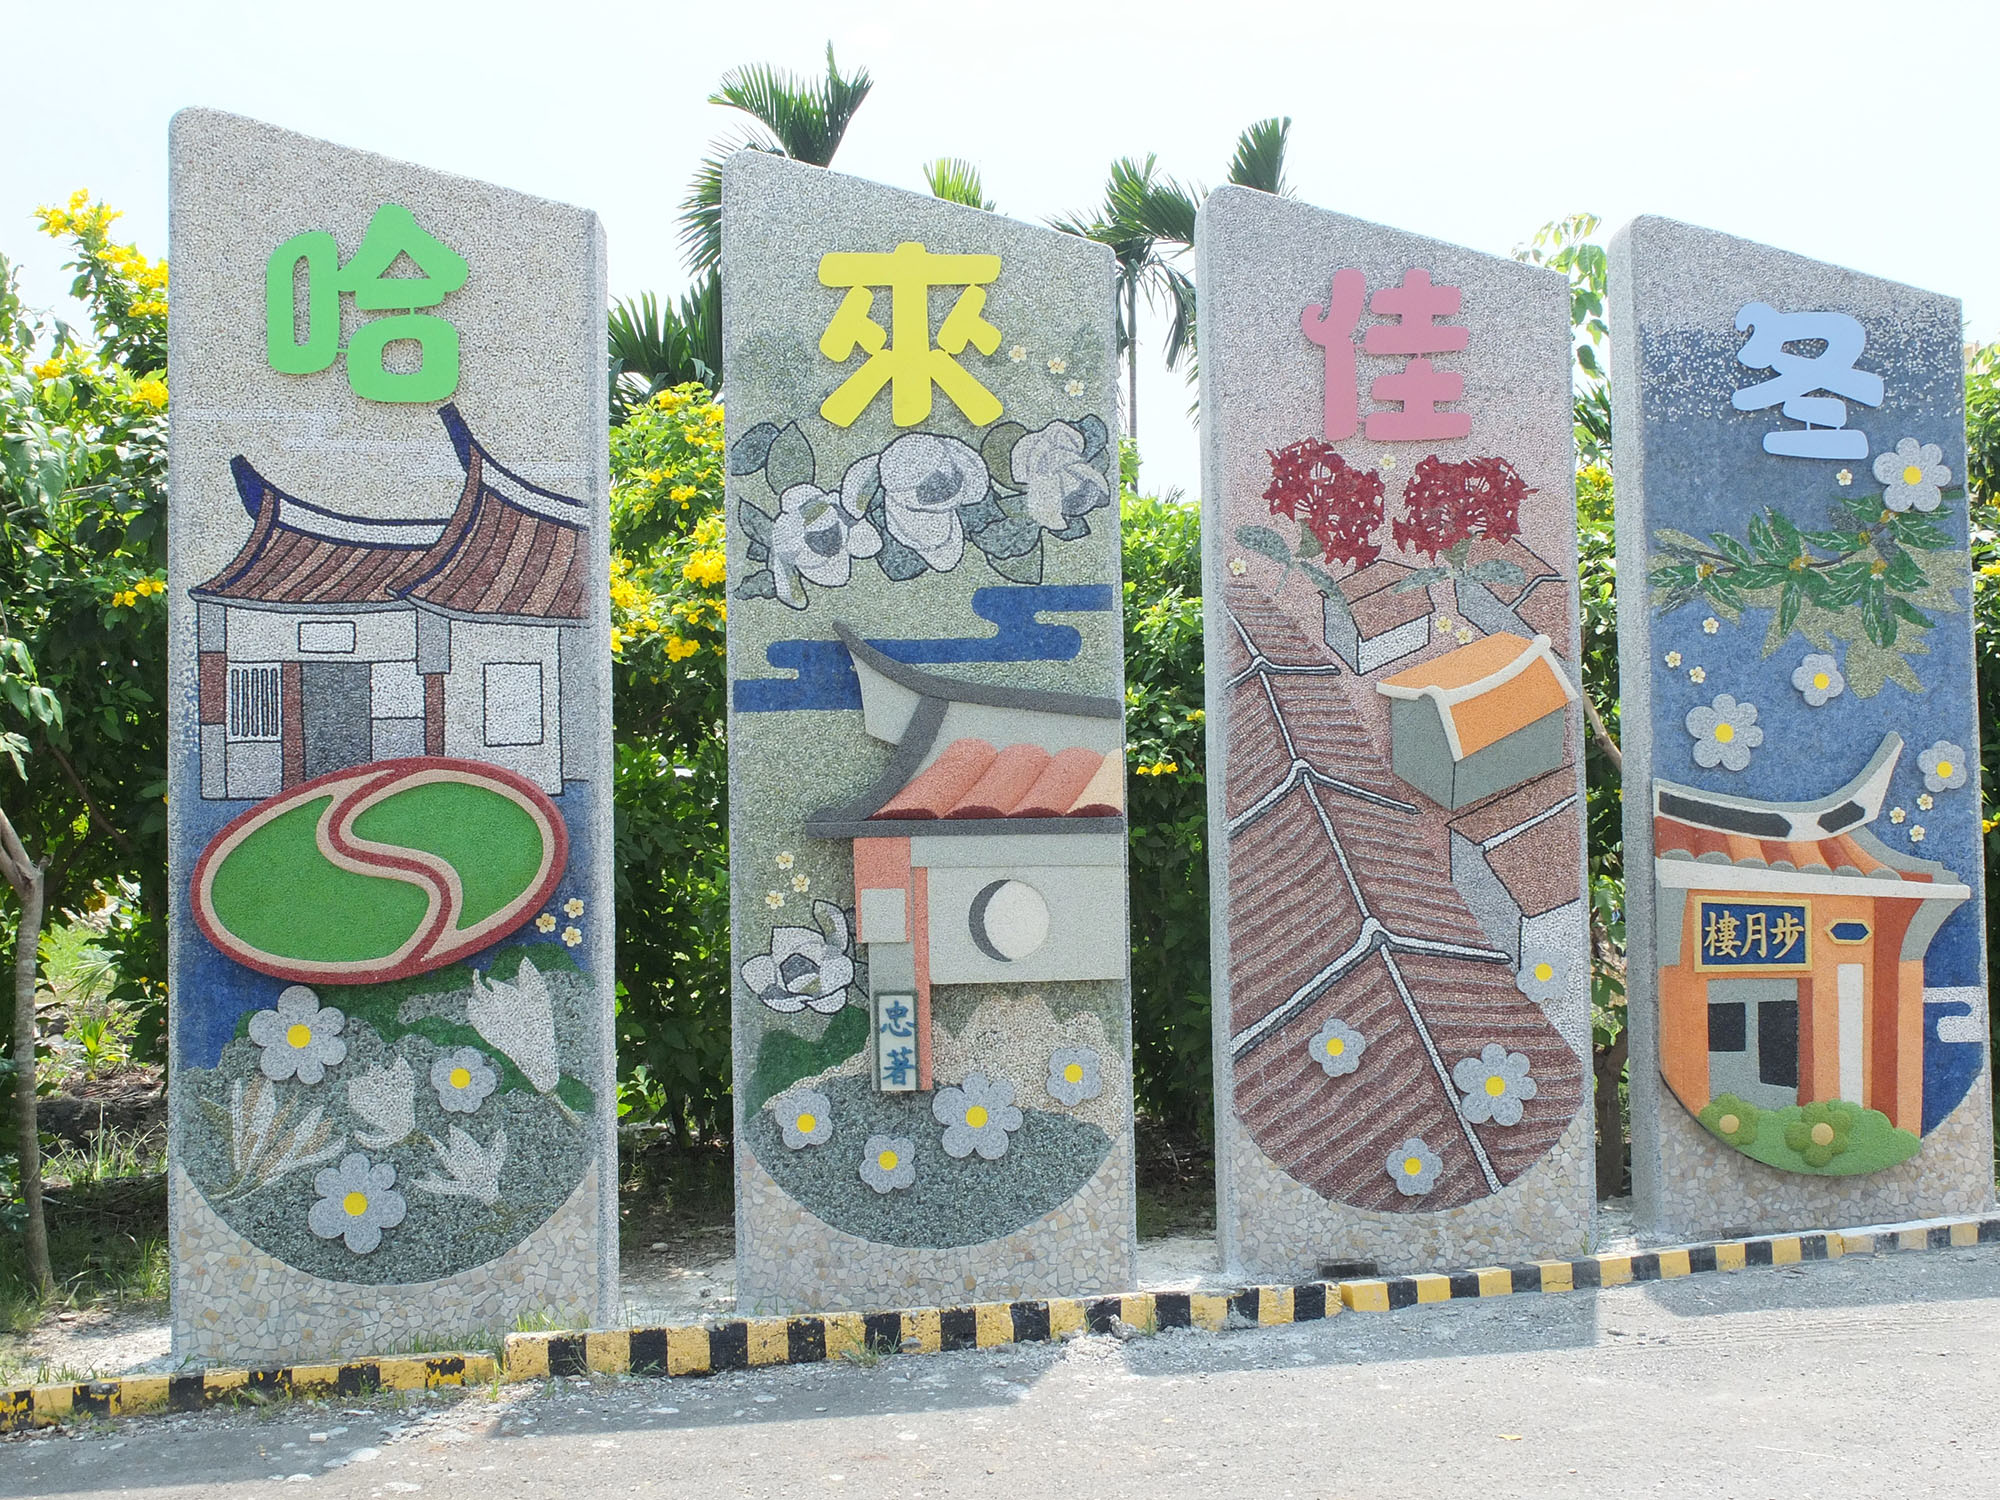 The entrance sign 'Welcome to Jiadong'